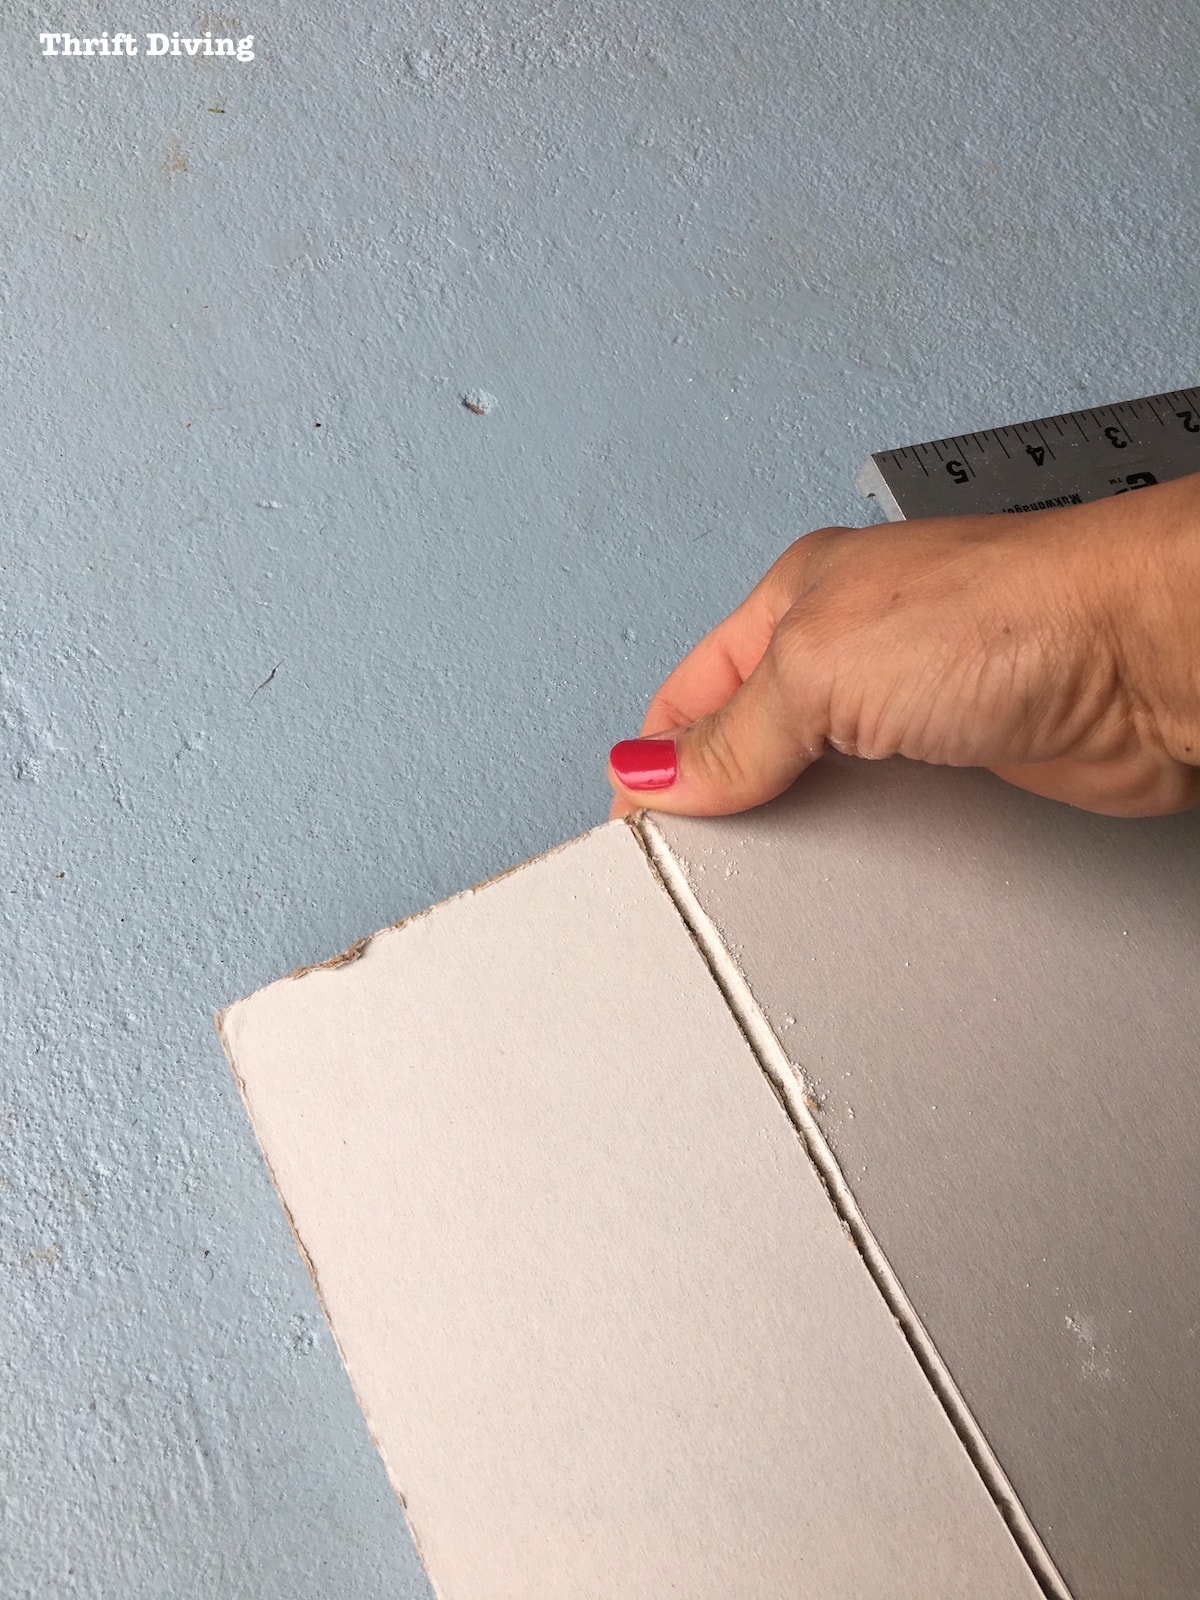 How-to-fix-big-holes-in-drywall-repair-Thrift-Diving - 70